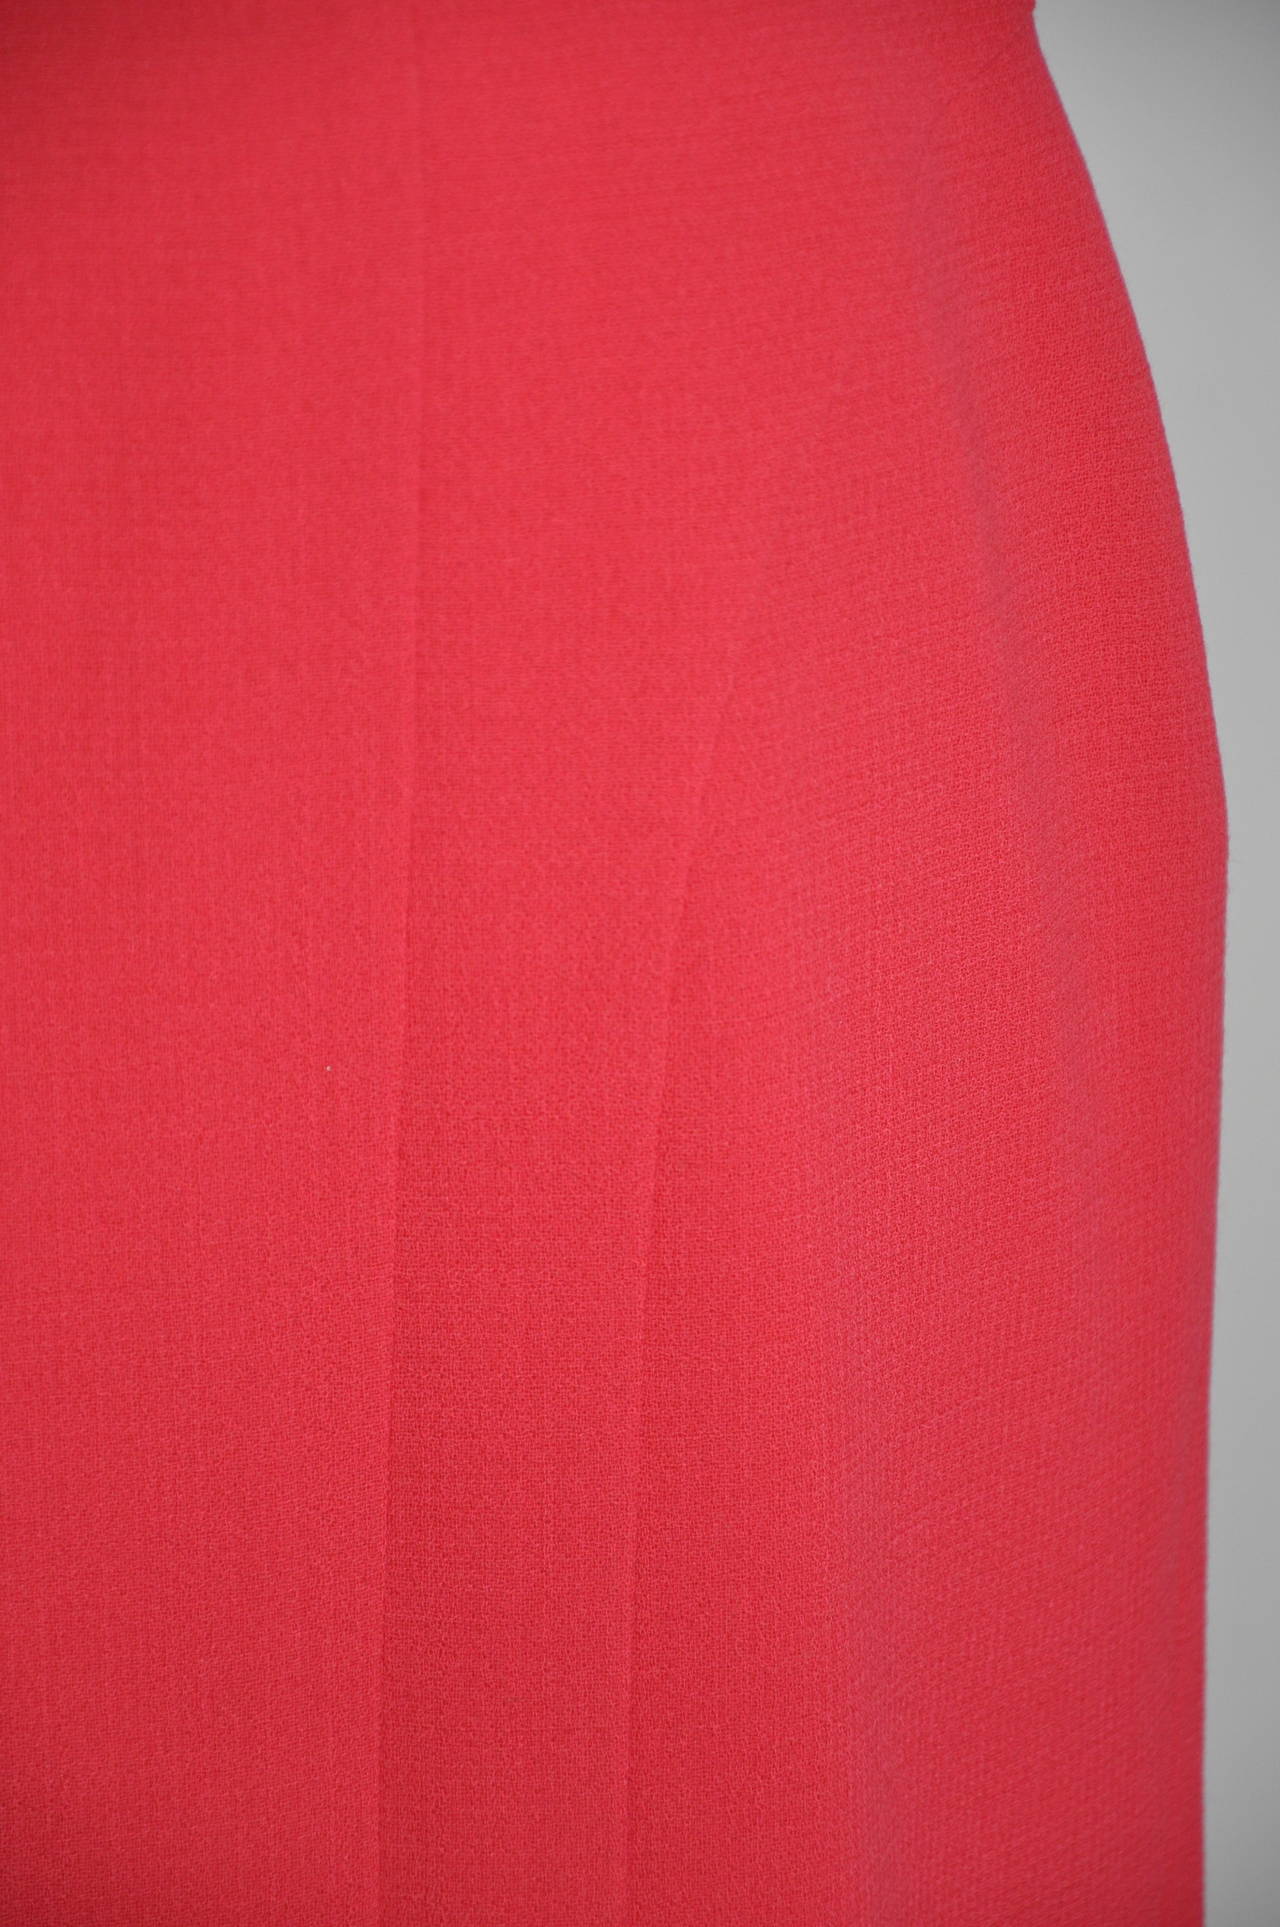 Women's Luca Luca Fully Lined Coral Wool Crepe Detailed Skirt